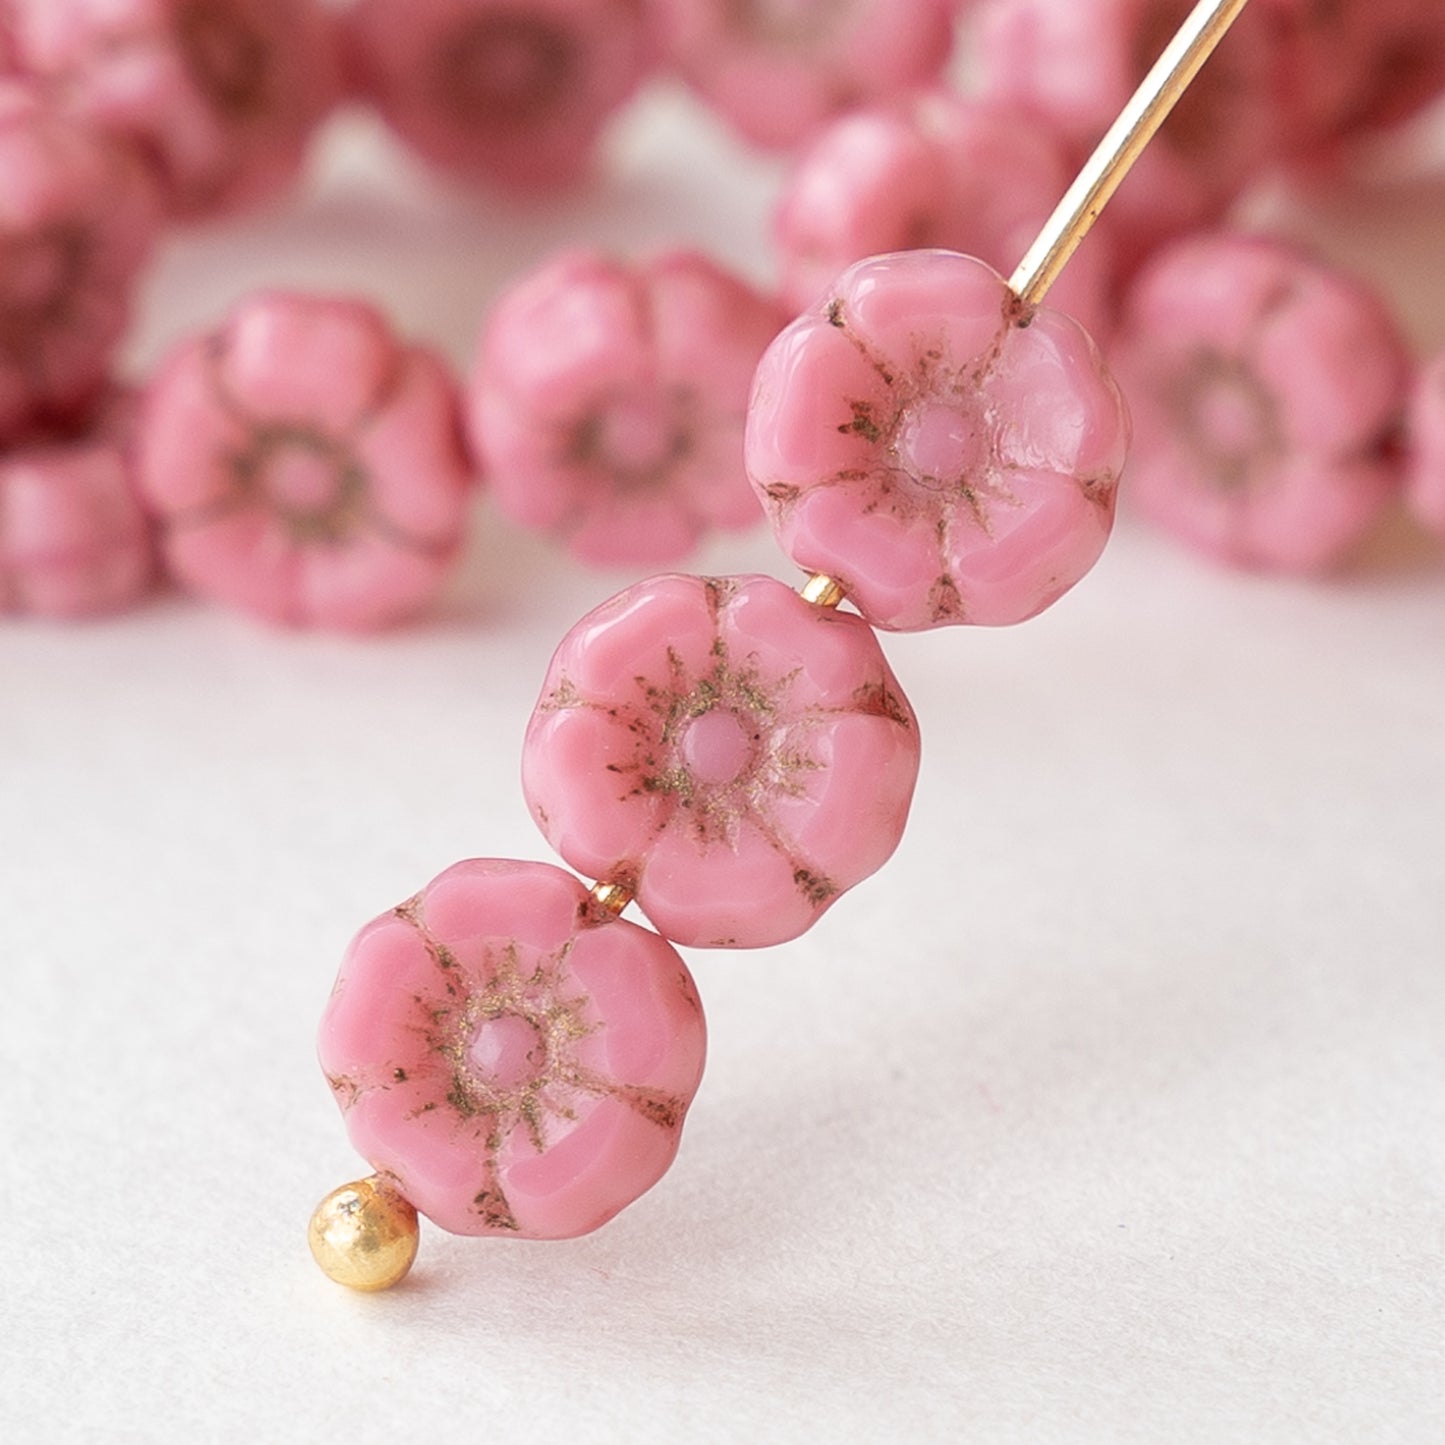 Load image into Gallery viewer, 7mm Glass Flower Beads - Dusty Pink Rose - 12 Beads
